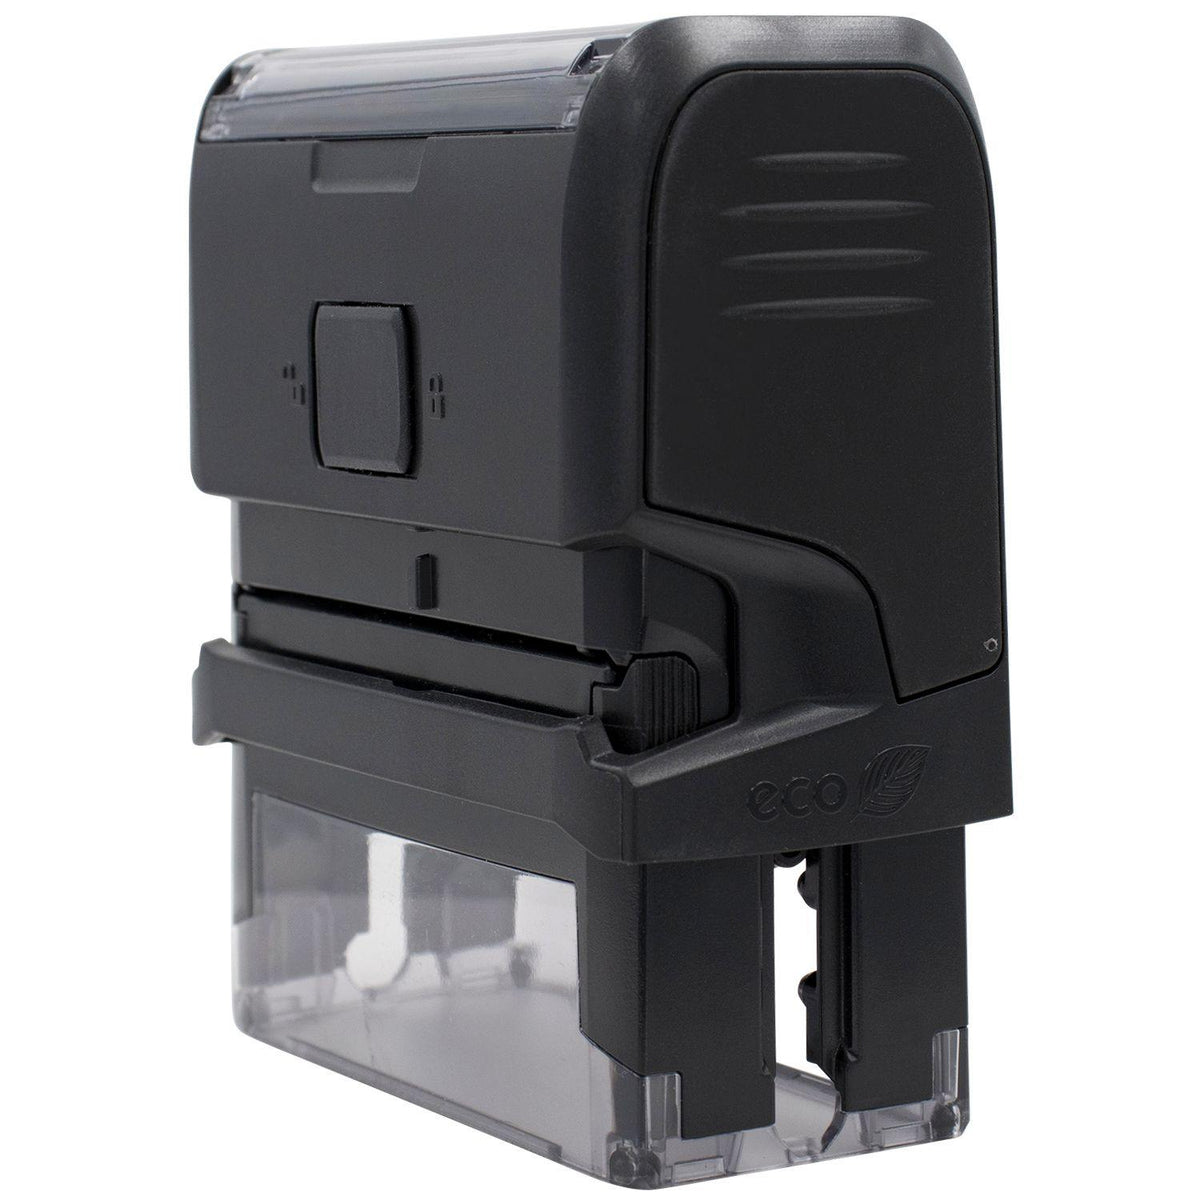 Large Self Inking No Insurance Stamp - Engineer Seal Stamps - Brand_Trodat, Impression Size_Large, Stamp Type_Self-Inking Stamp, Type of Use_Medical Office